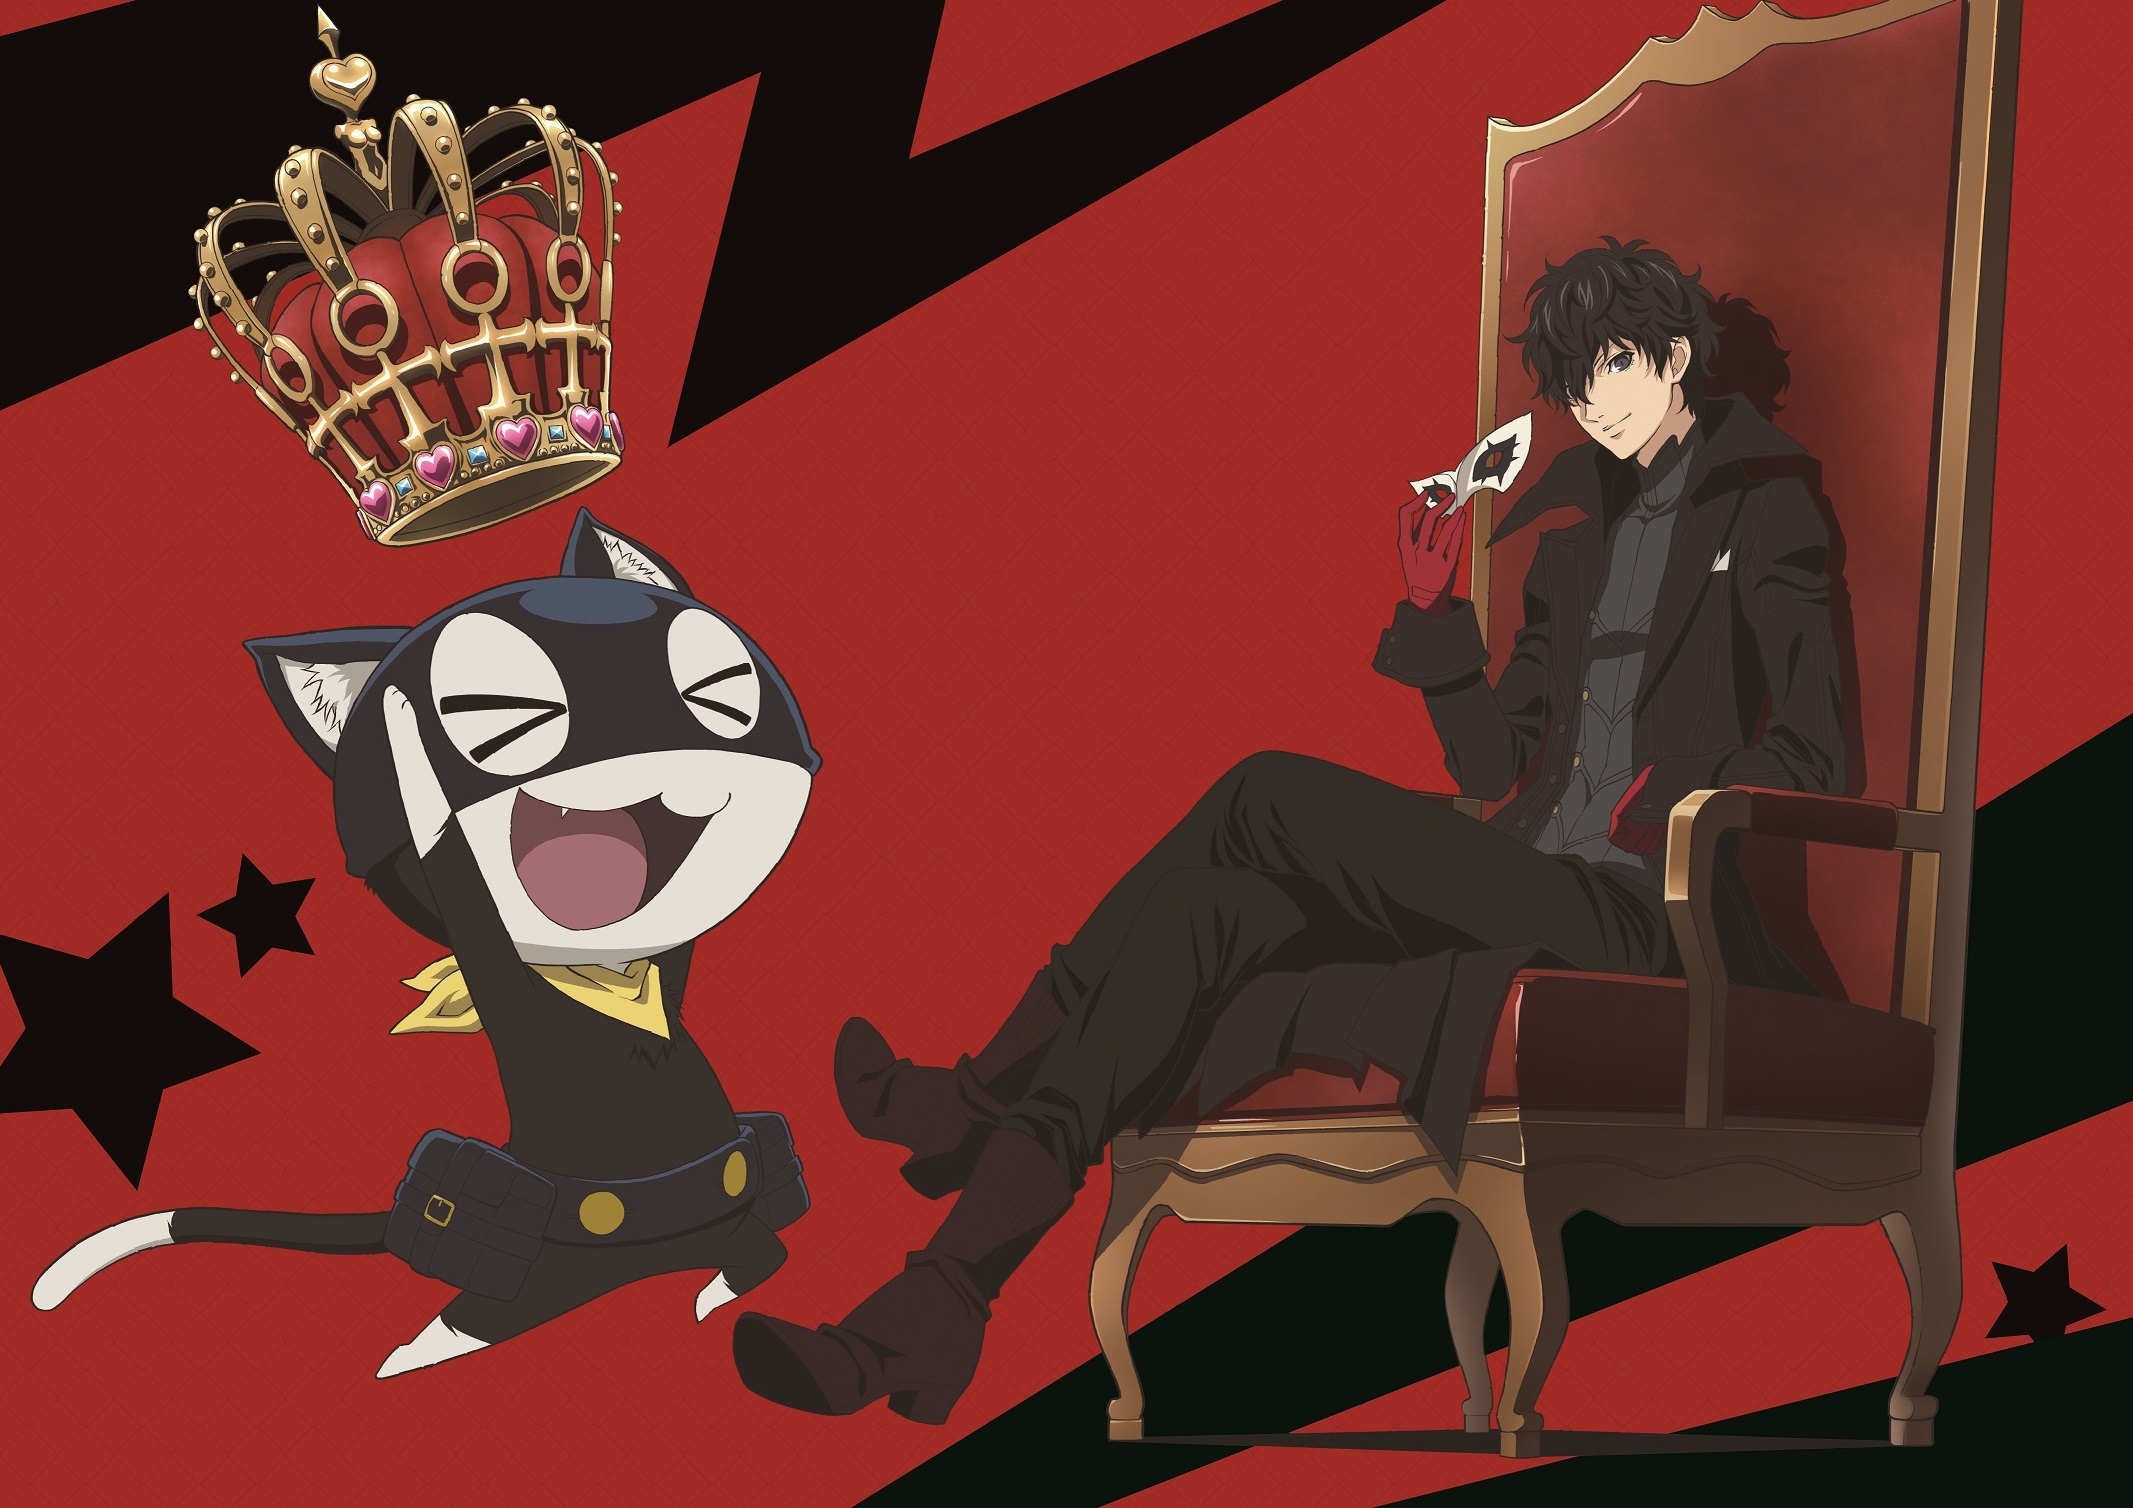 Video Game Persona 5 HD Wallpaper | Background Image